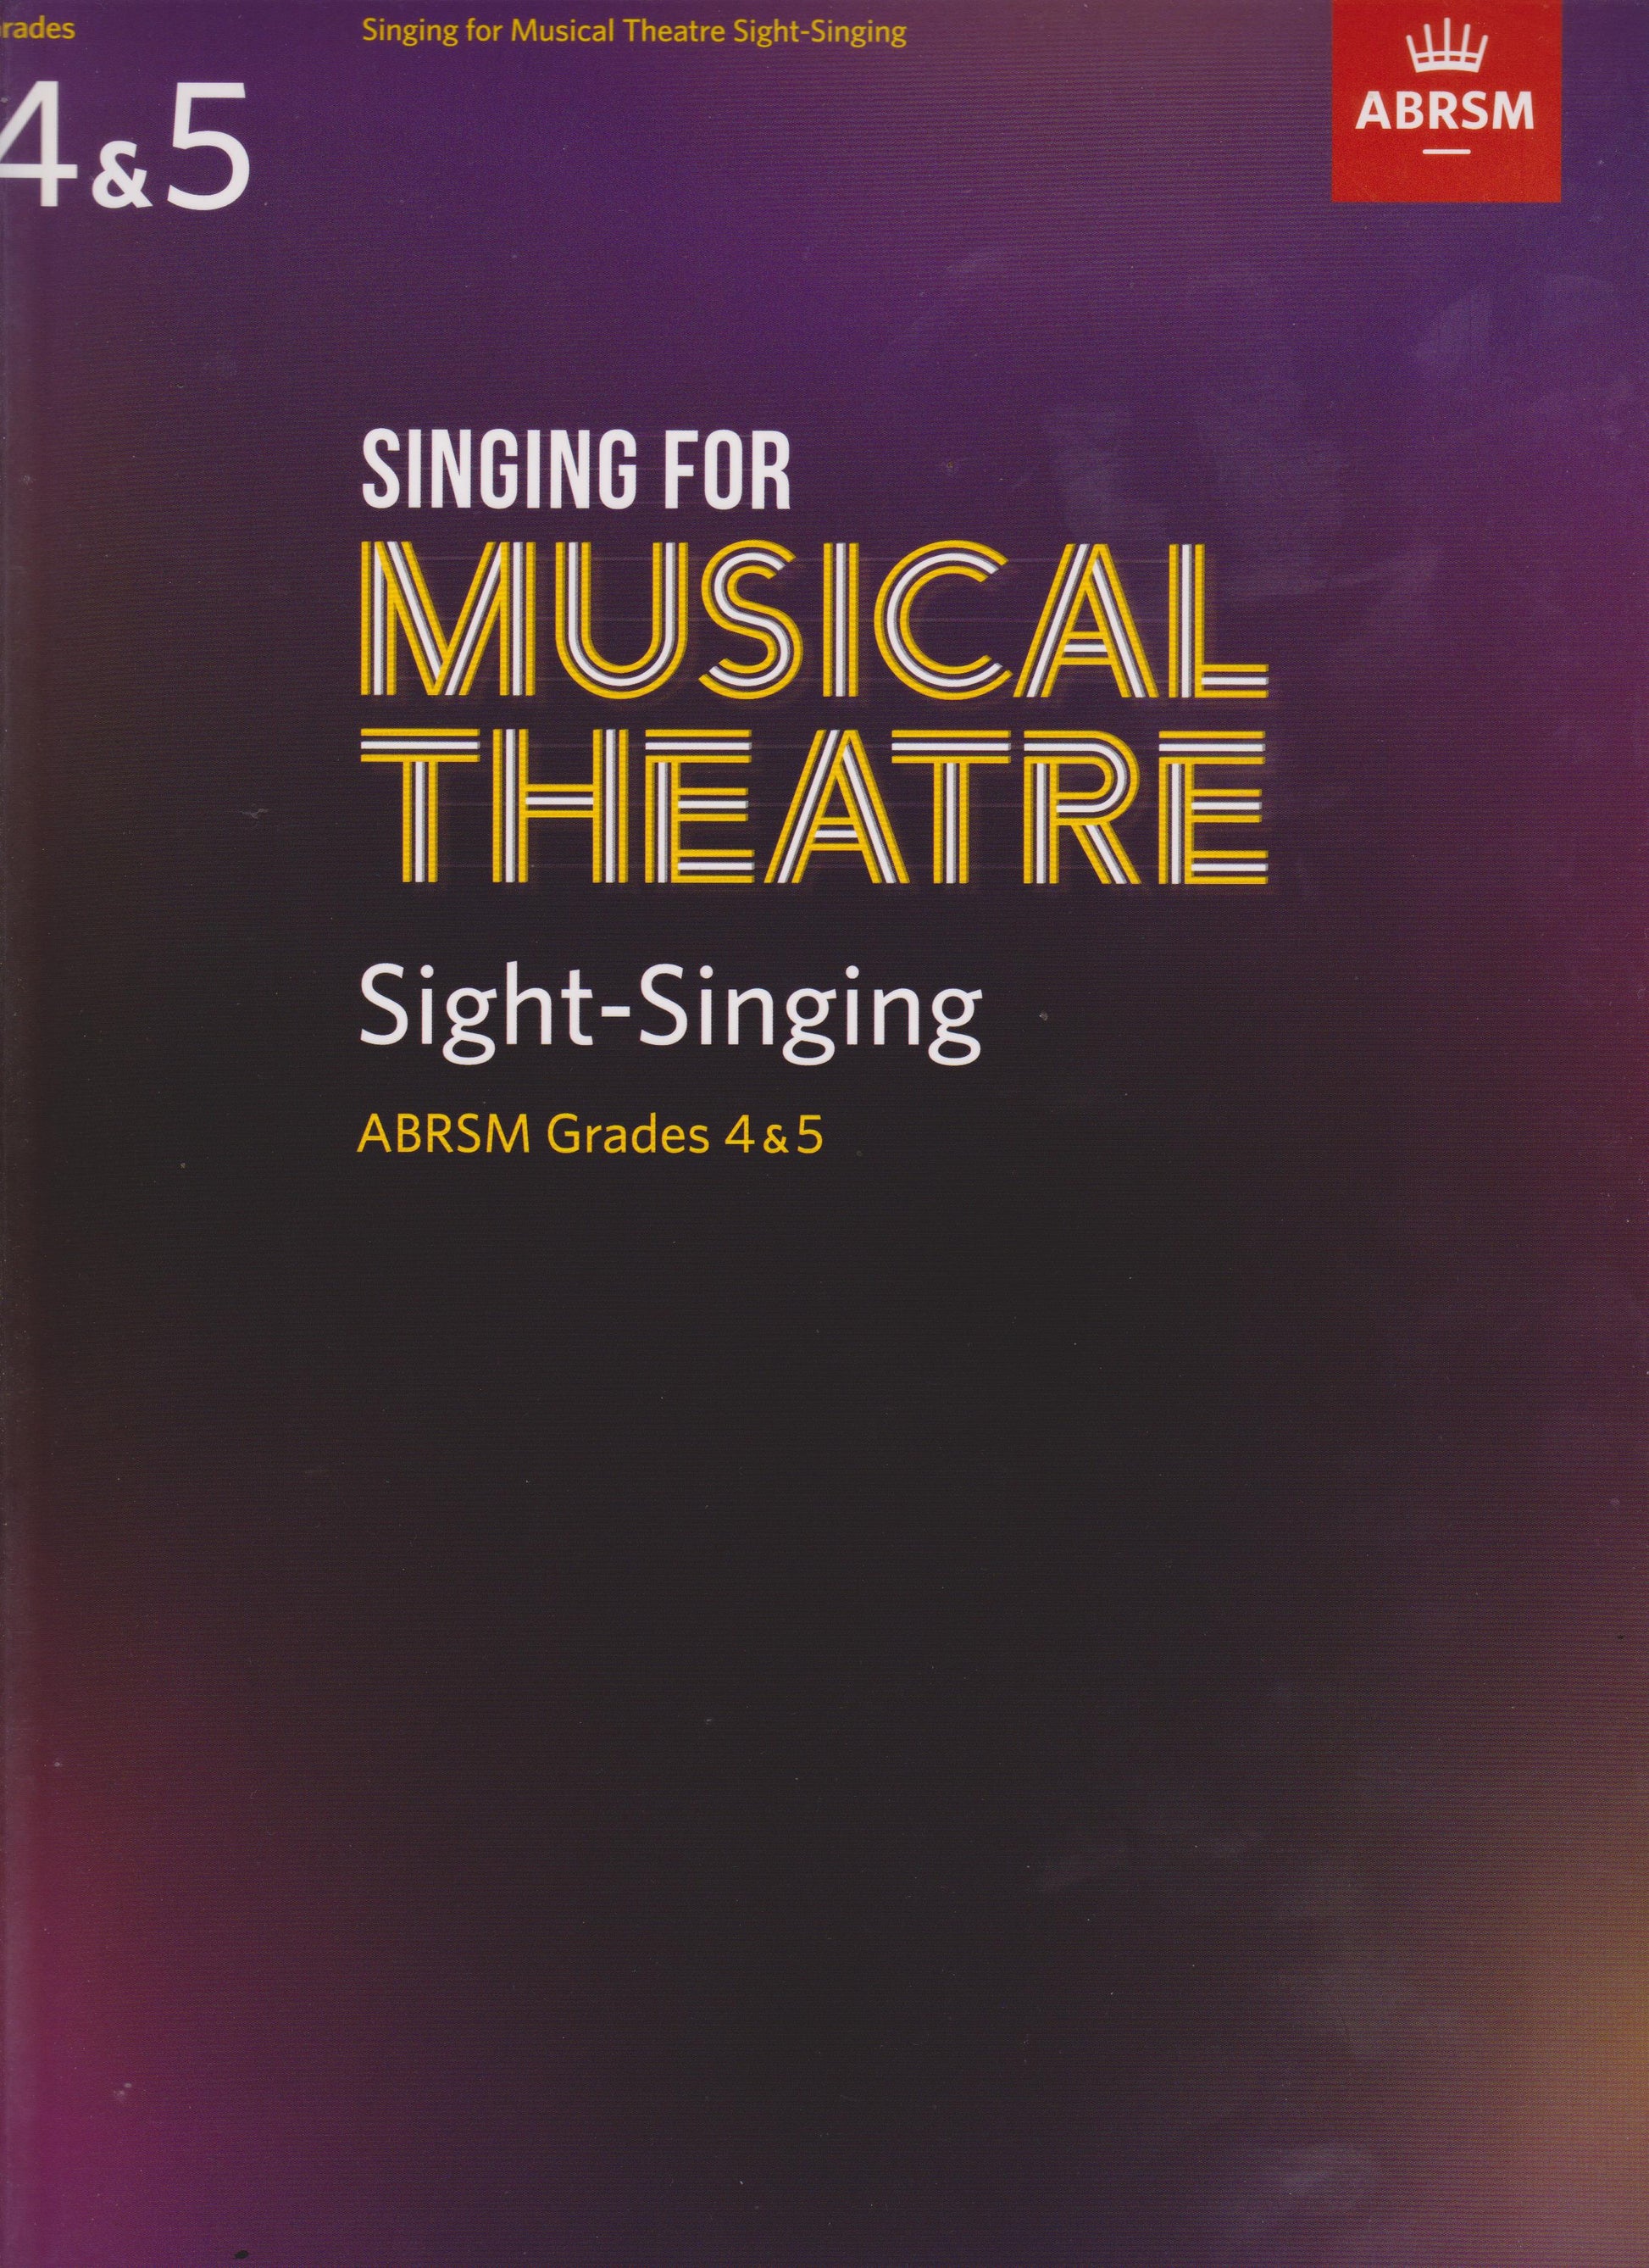 ABRSM Singing for Musical Theatre Sight-Singing Grades 4 & 5